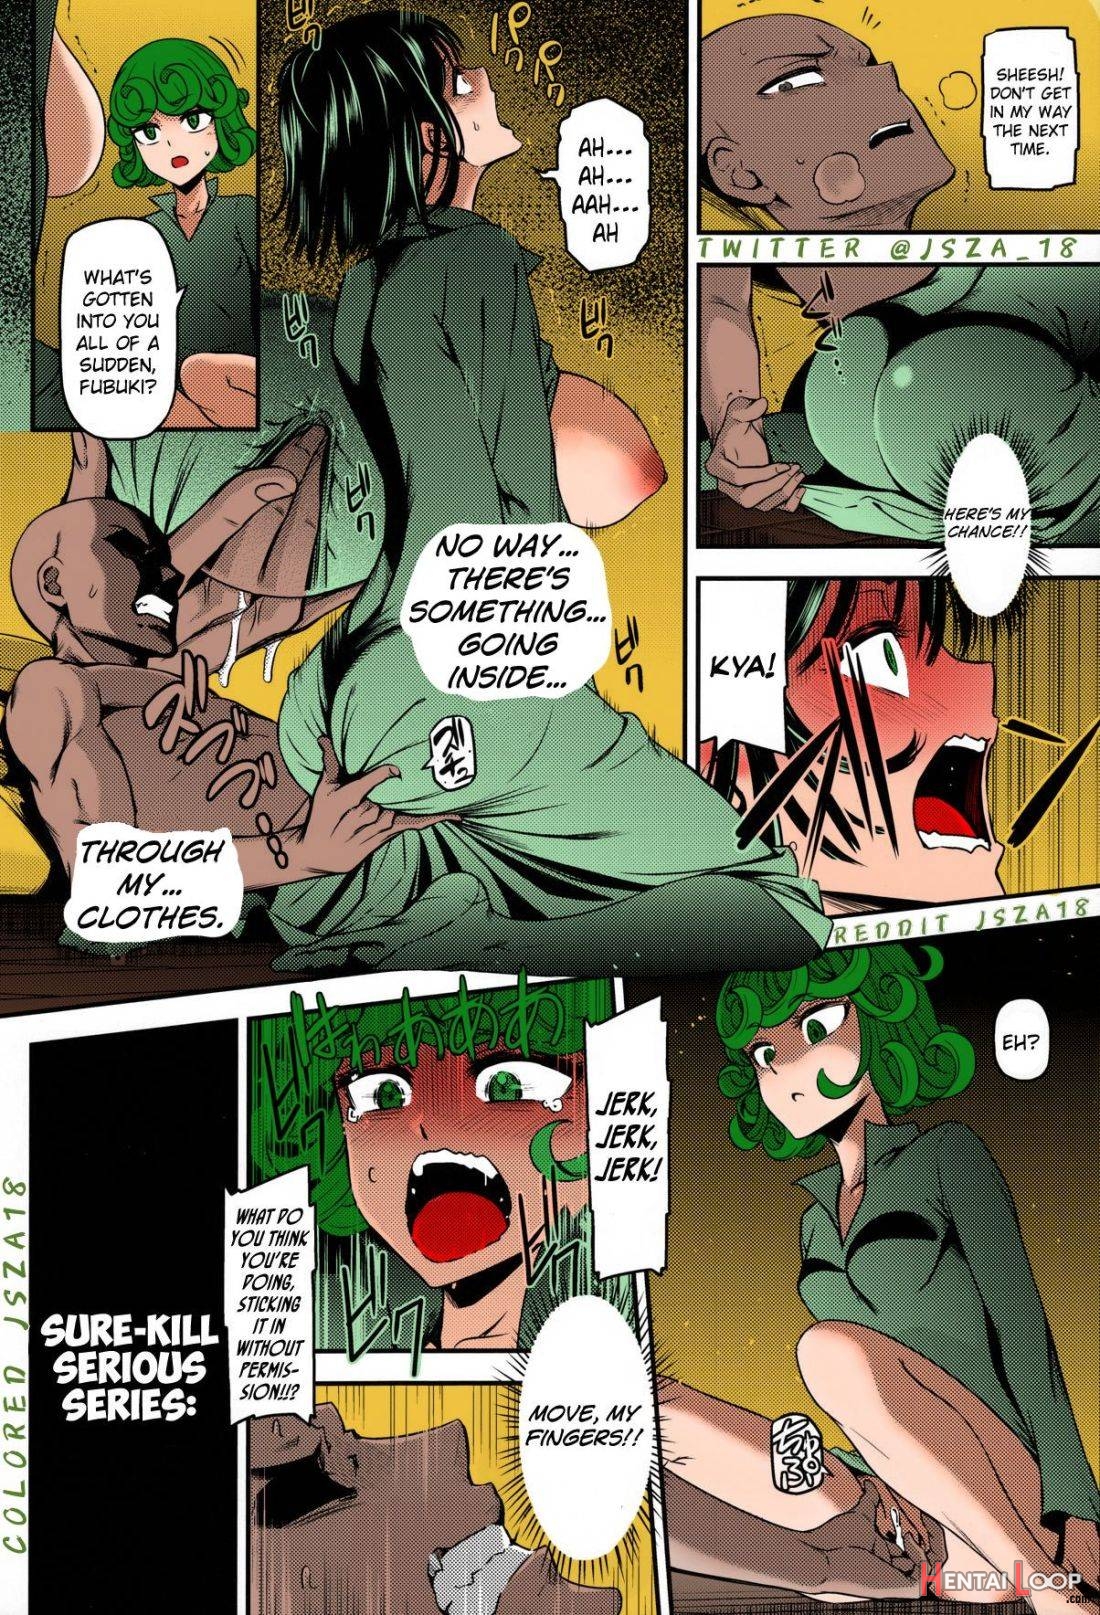 ONE-HURRICANE 4 – Colorized page 15